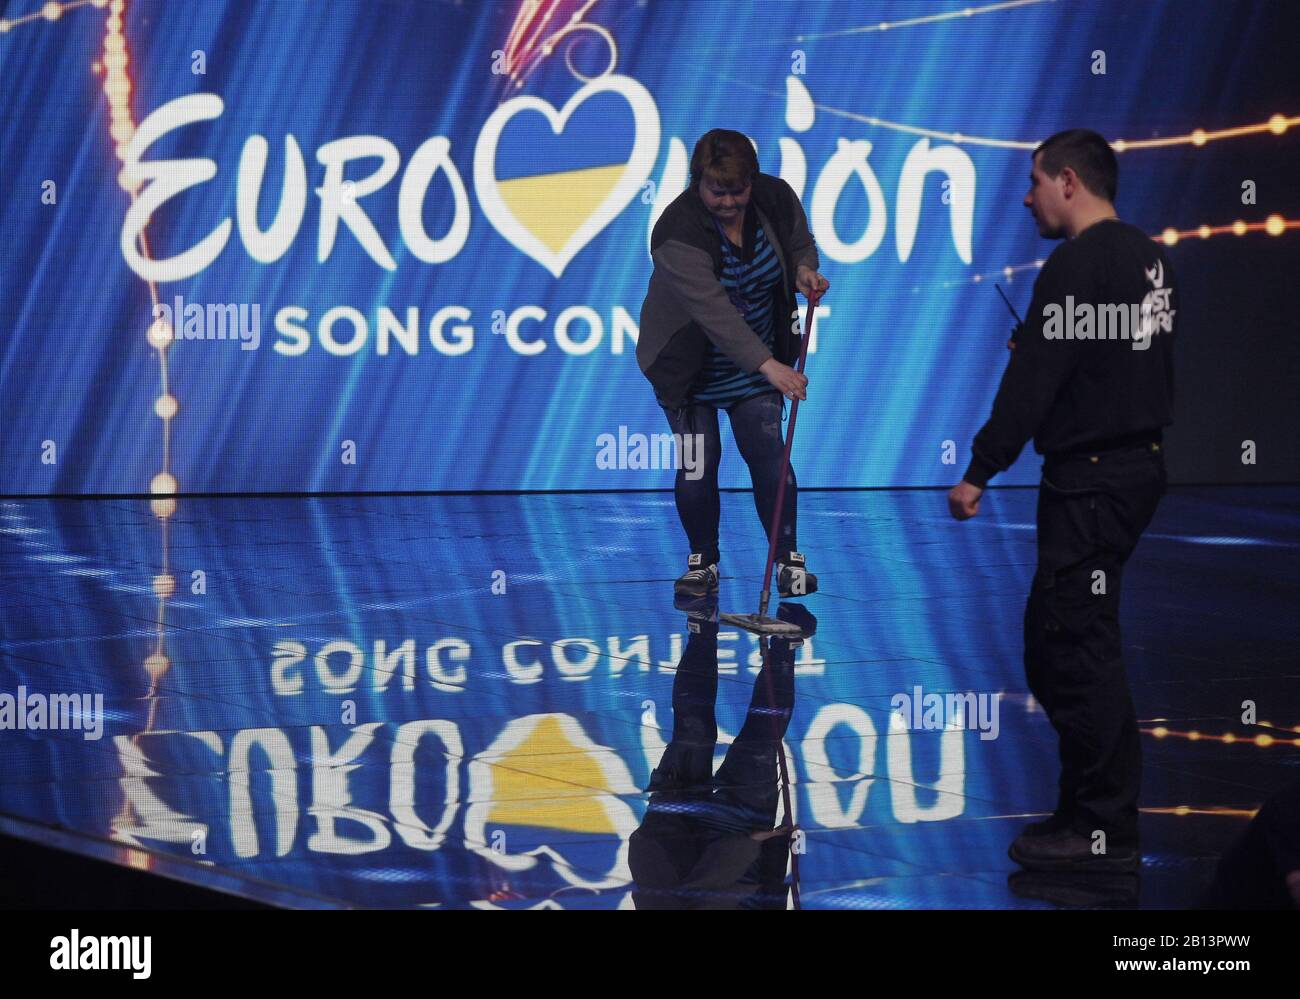 Kiev, Ukraine. 22nd Feb, 2020. Staff prepare the stage during the Eurovision Song Contest (ESC) 2020 national selection final in Kiev, Ukraine, on 22 February 2020. Ukrainian band GÐ¾ A with 'Solovey' song will represents Ukraine during the 2020 the Eurovision Song Contest contest in Rotterdam, Netherlands, from 12 to 16 May 2020. Credit: Serg Glovny/ZUMA Wire/Alamy Live News Stock Photo